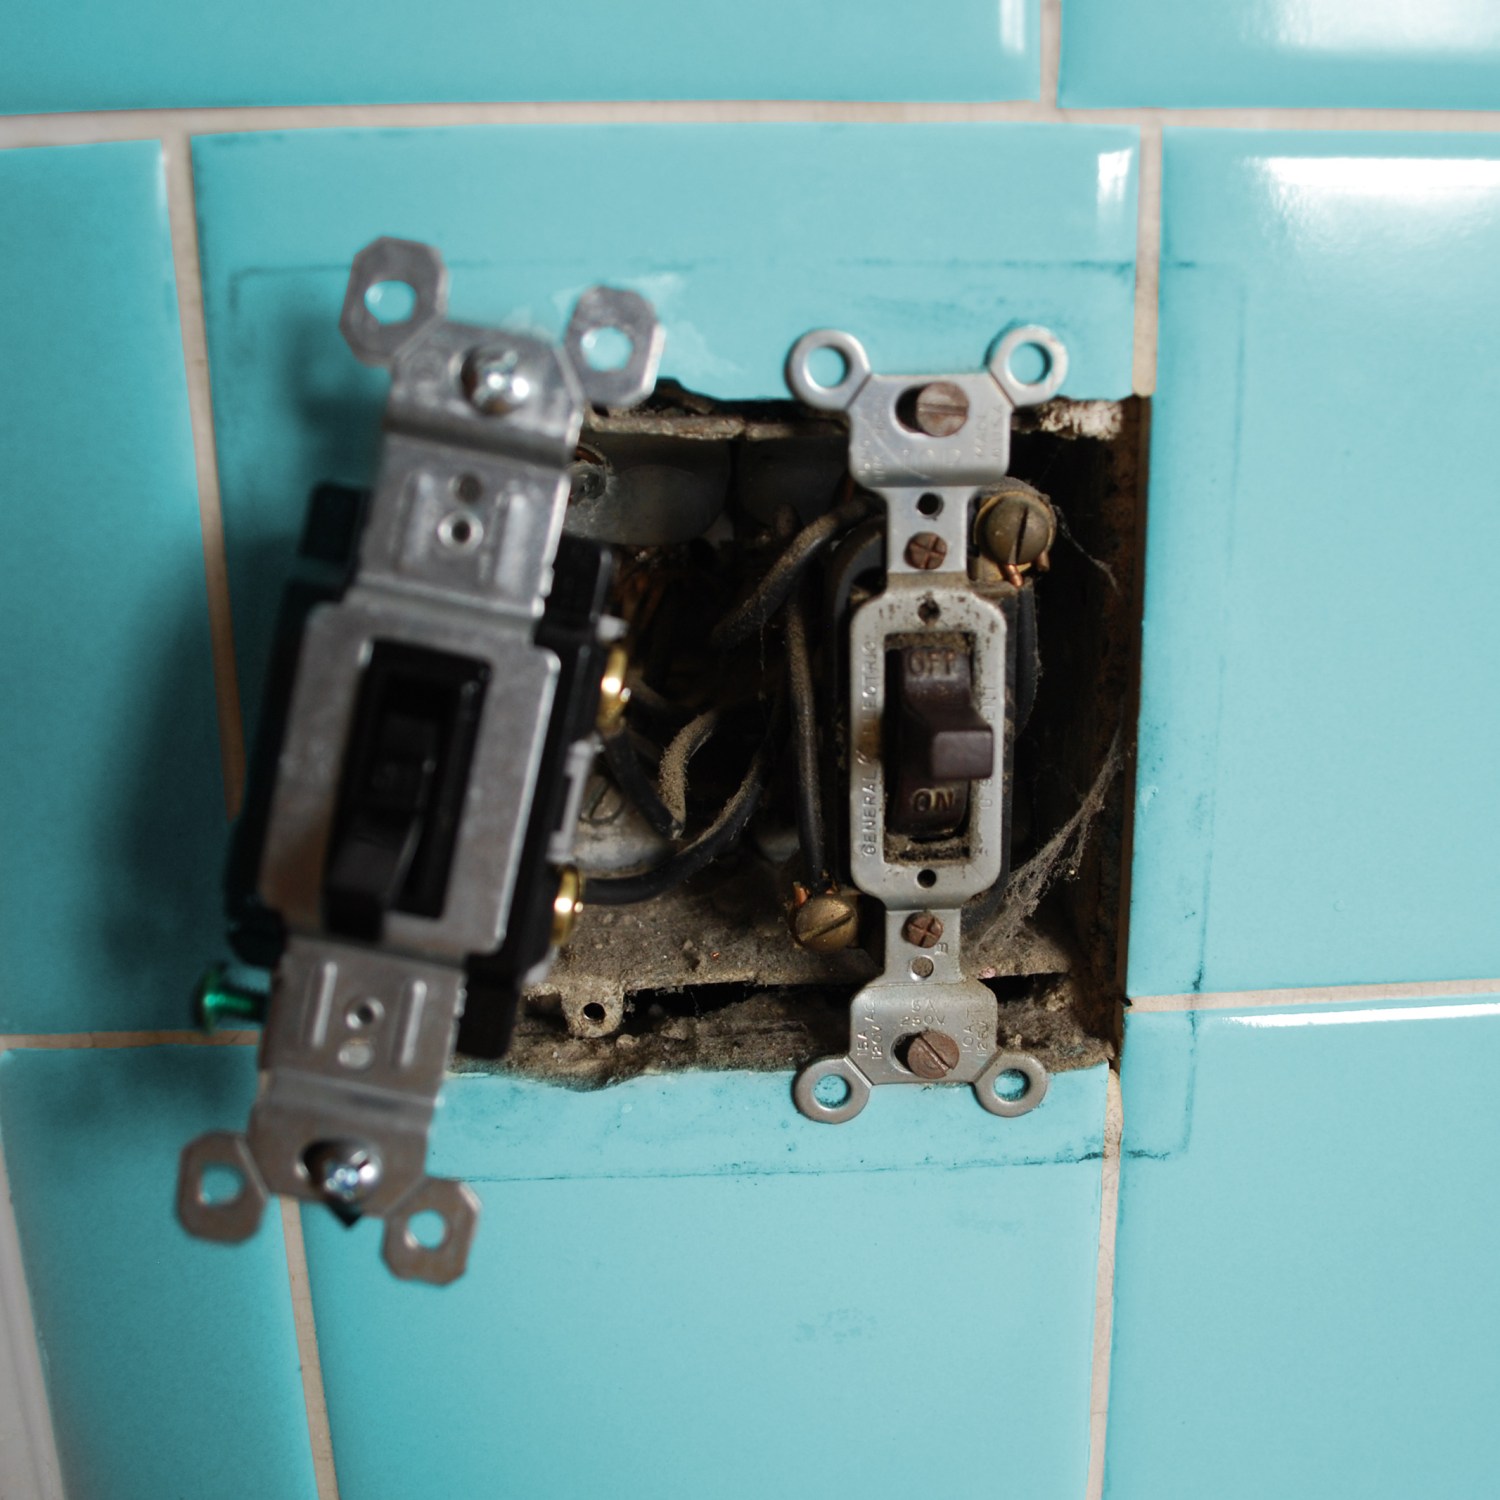 Repairing a light switch in a home